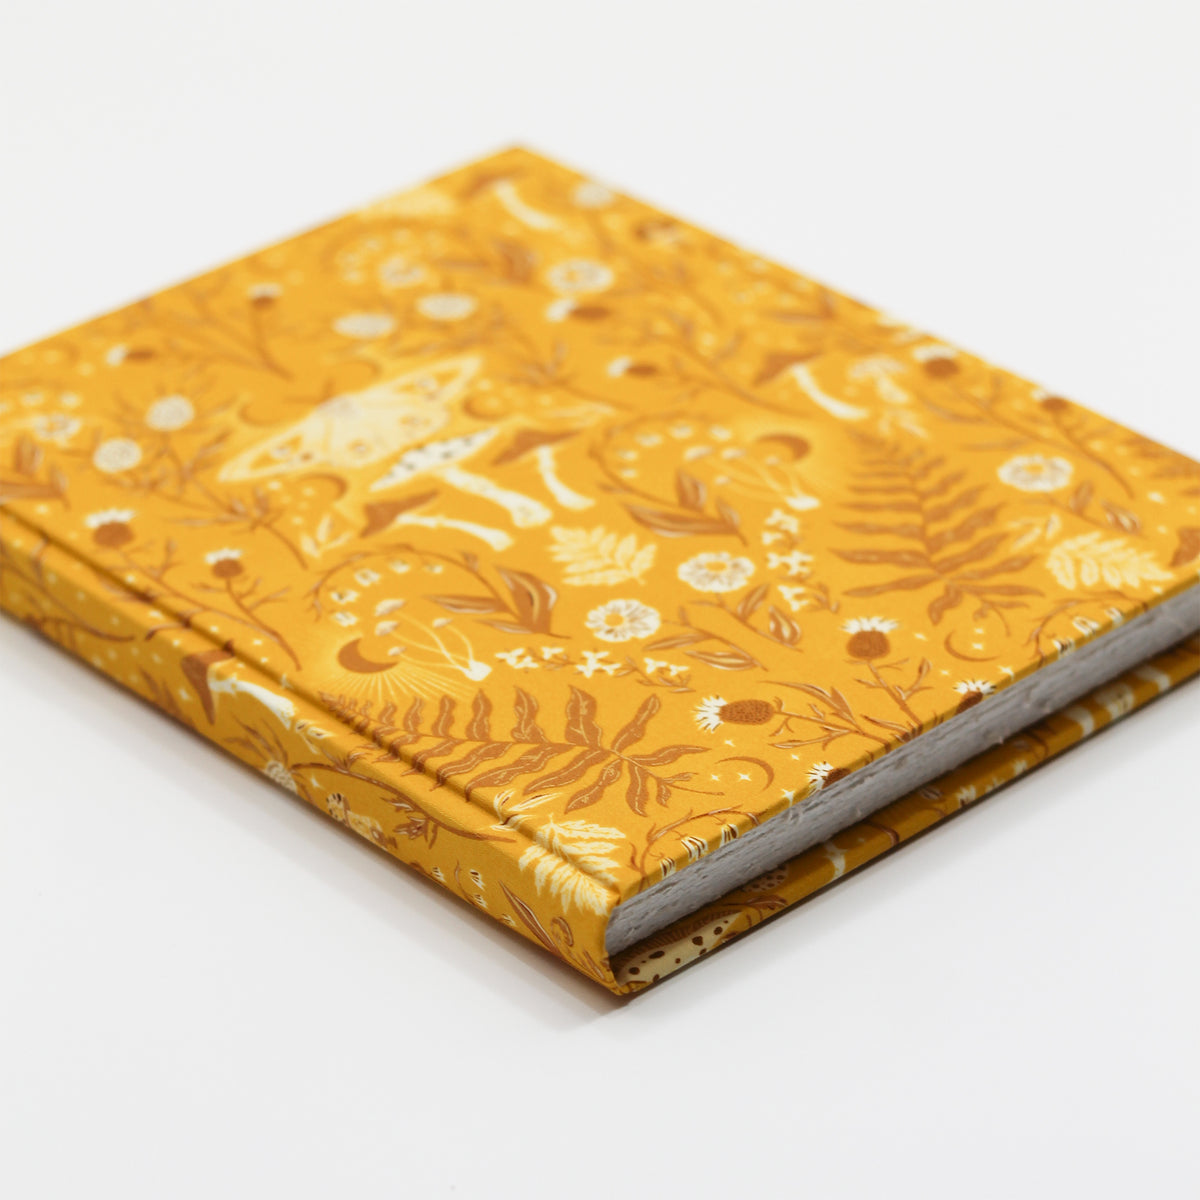 Large 8x10 Blank Page Journal | Cover: Golden Thistle